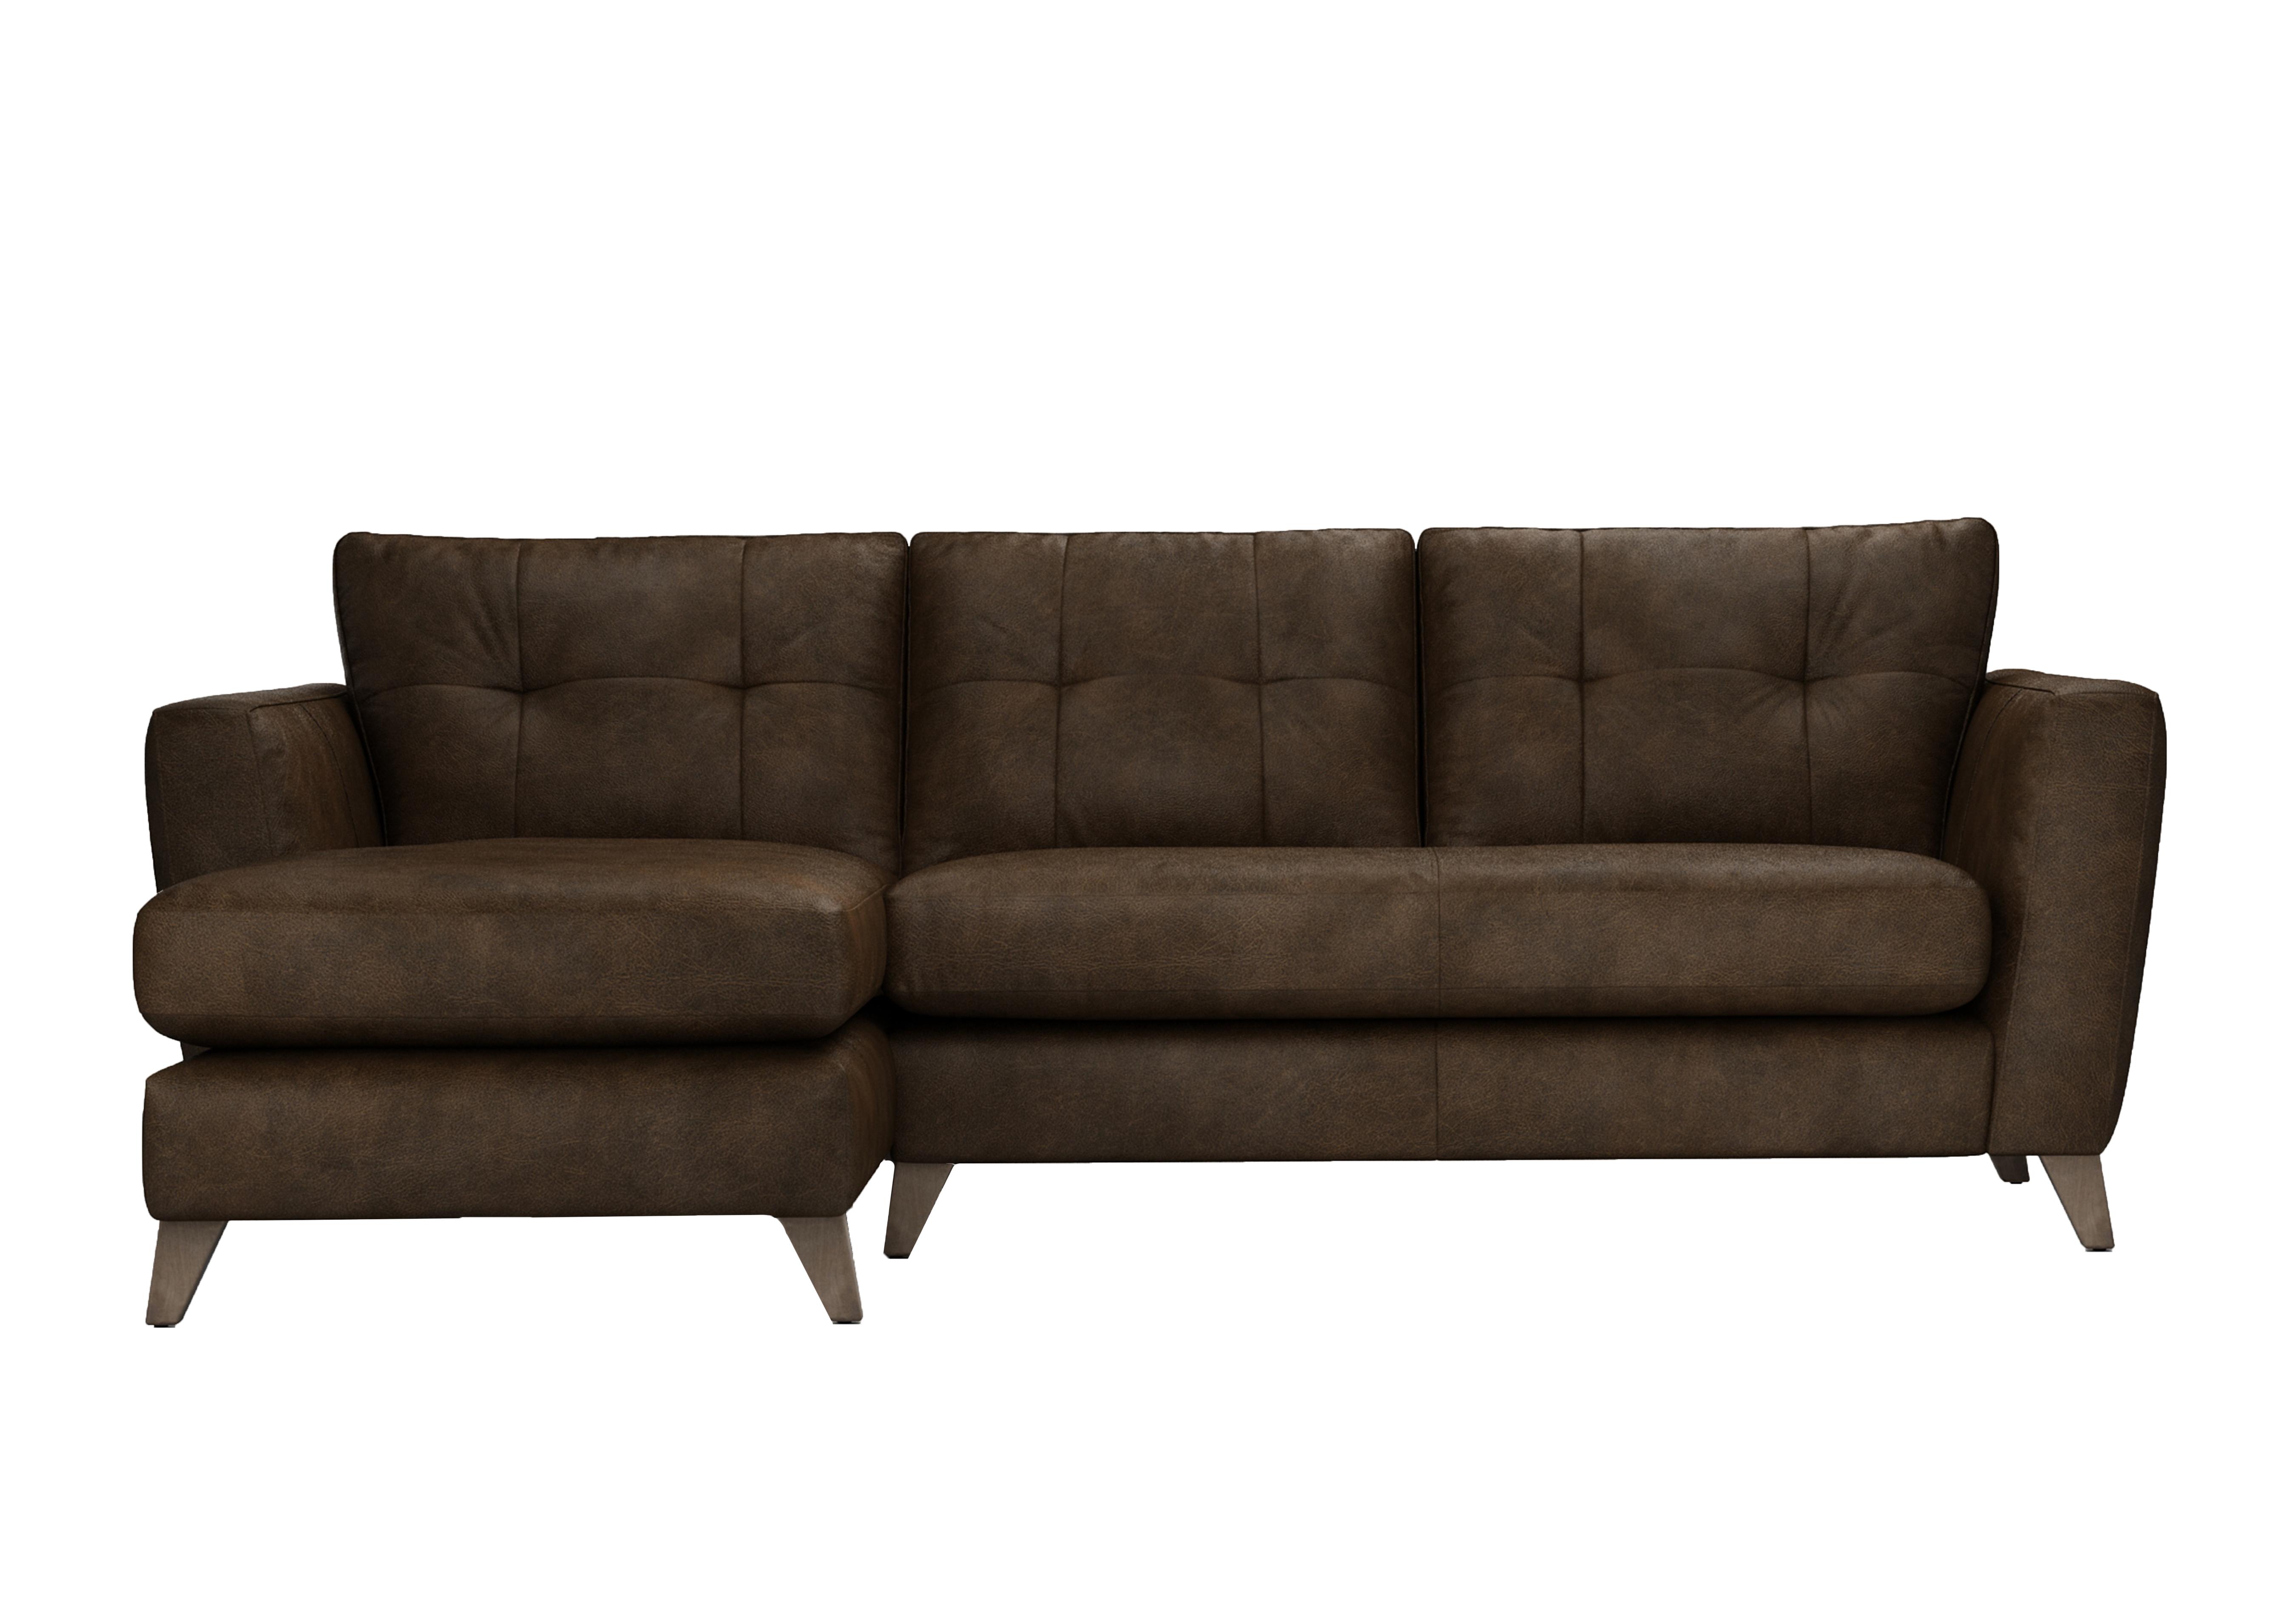 Hermione Leather Corner Sofa with Chaise End in Bou192 Bourbon Wo Ft on Furniture Village